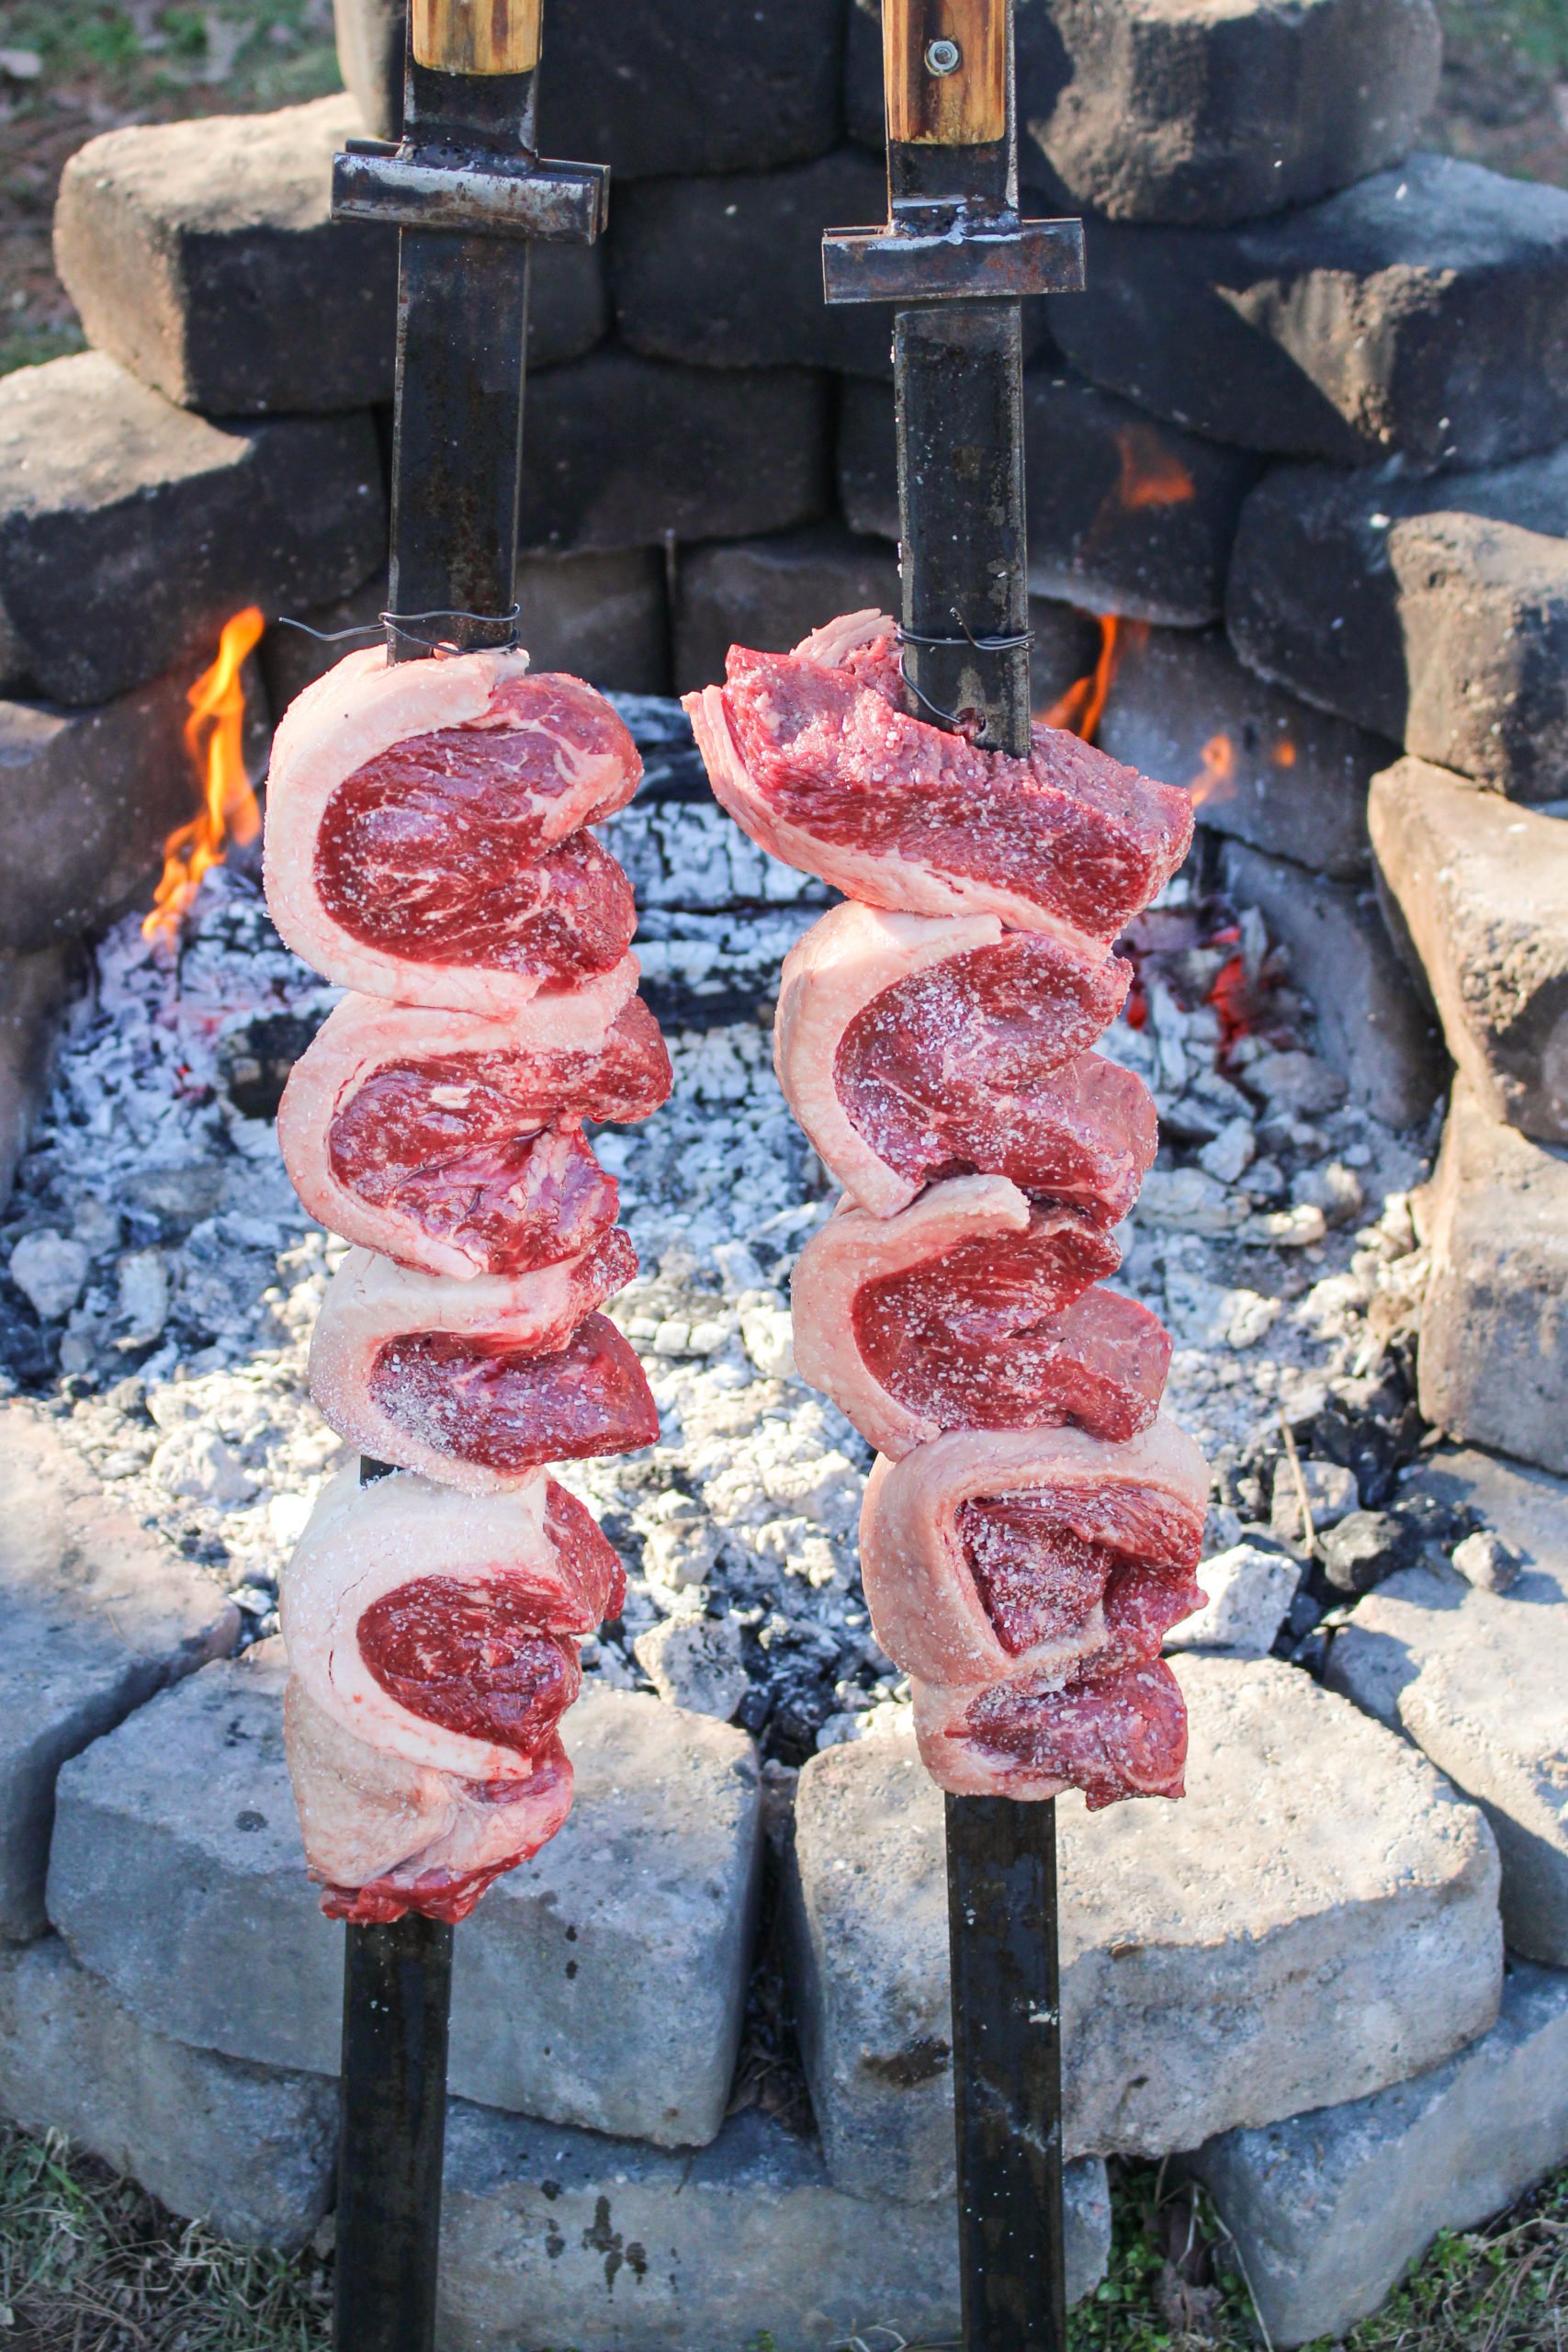 Churrasco Picanha gets situated by the fire.